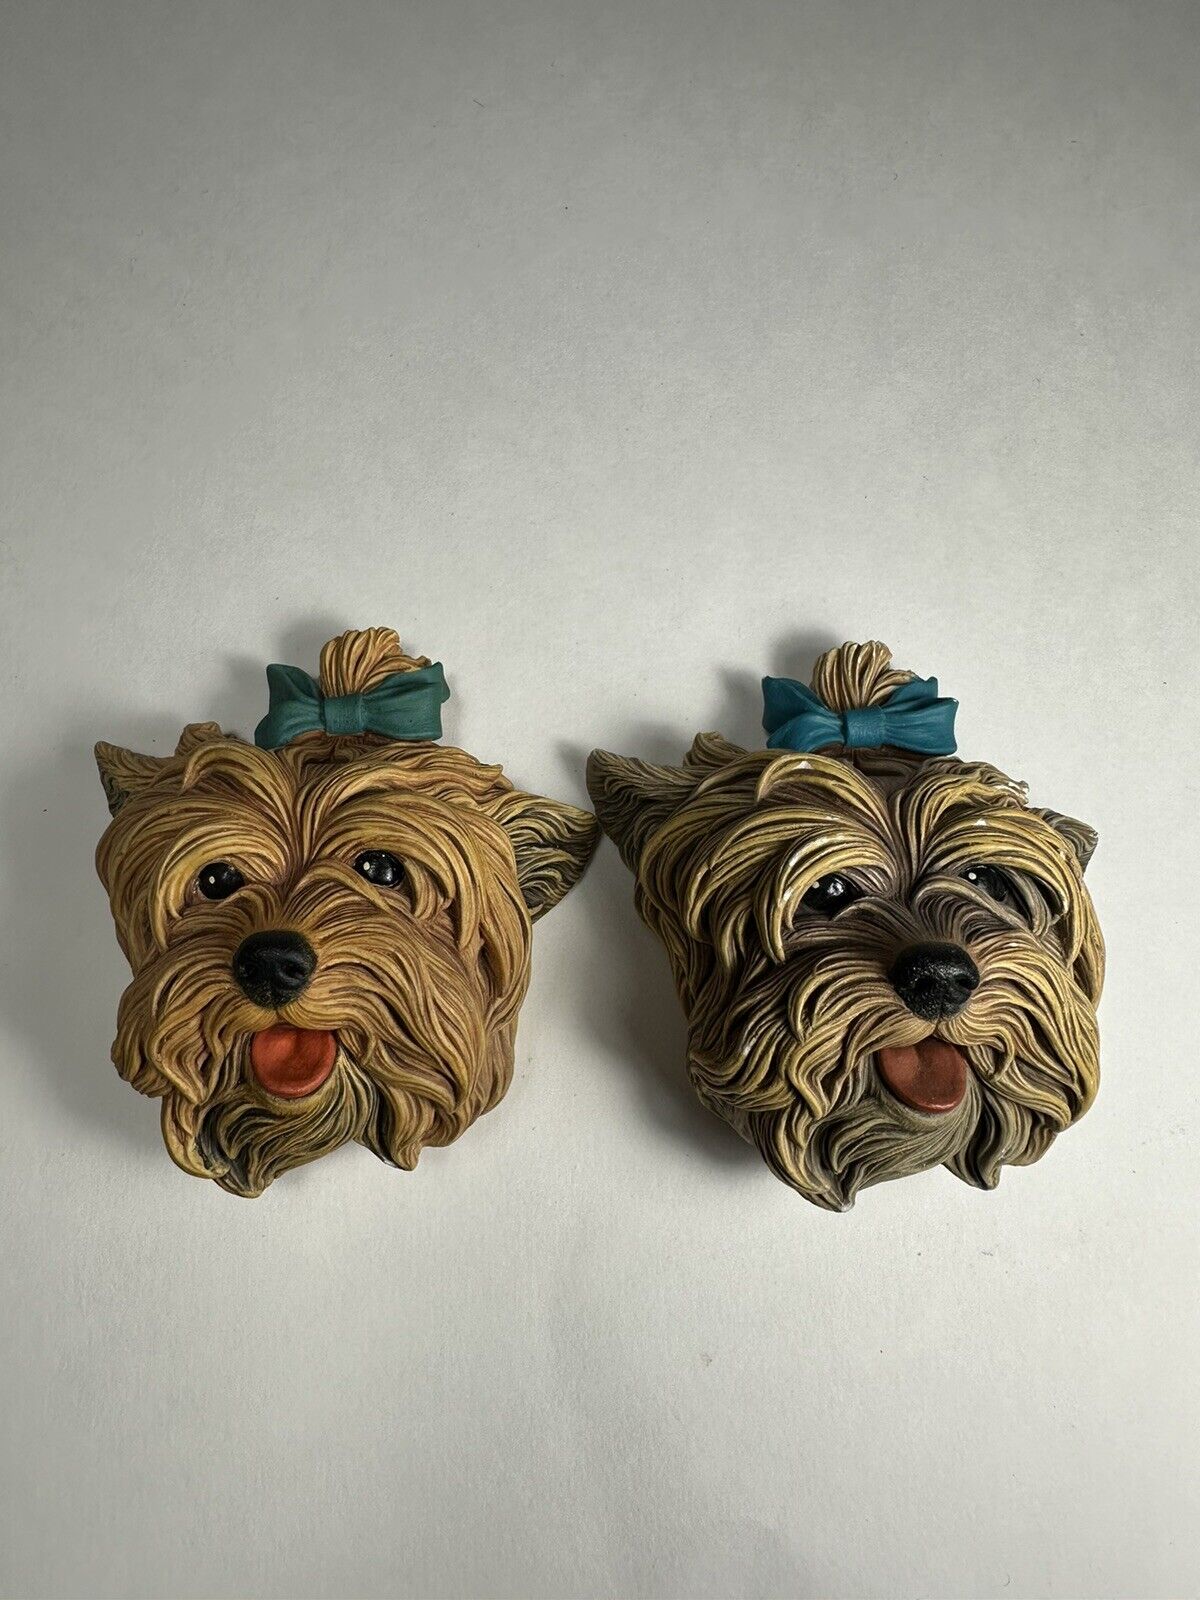 Bossons Congleton England Yorkshire Terrier Pair 2 Wall Figurines Yorkie Dog